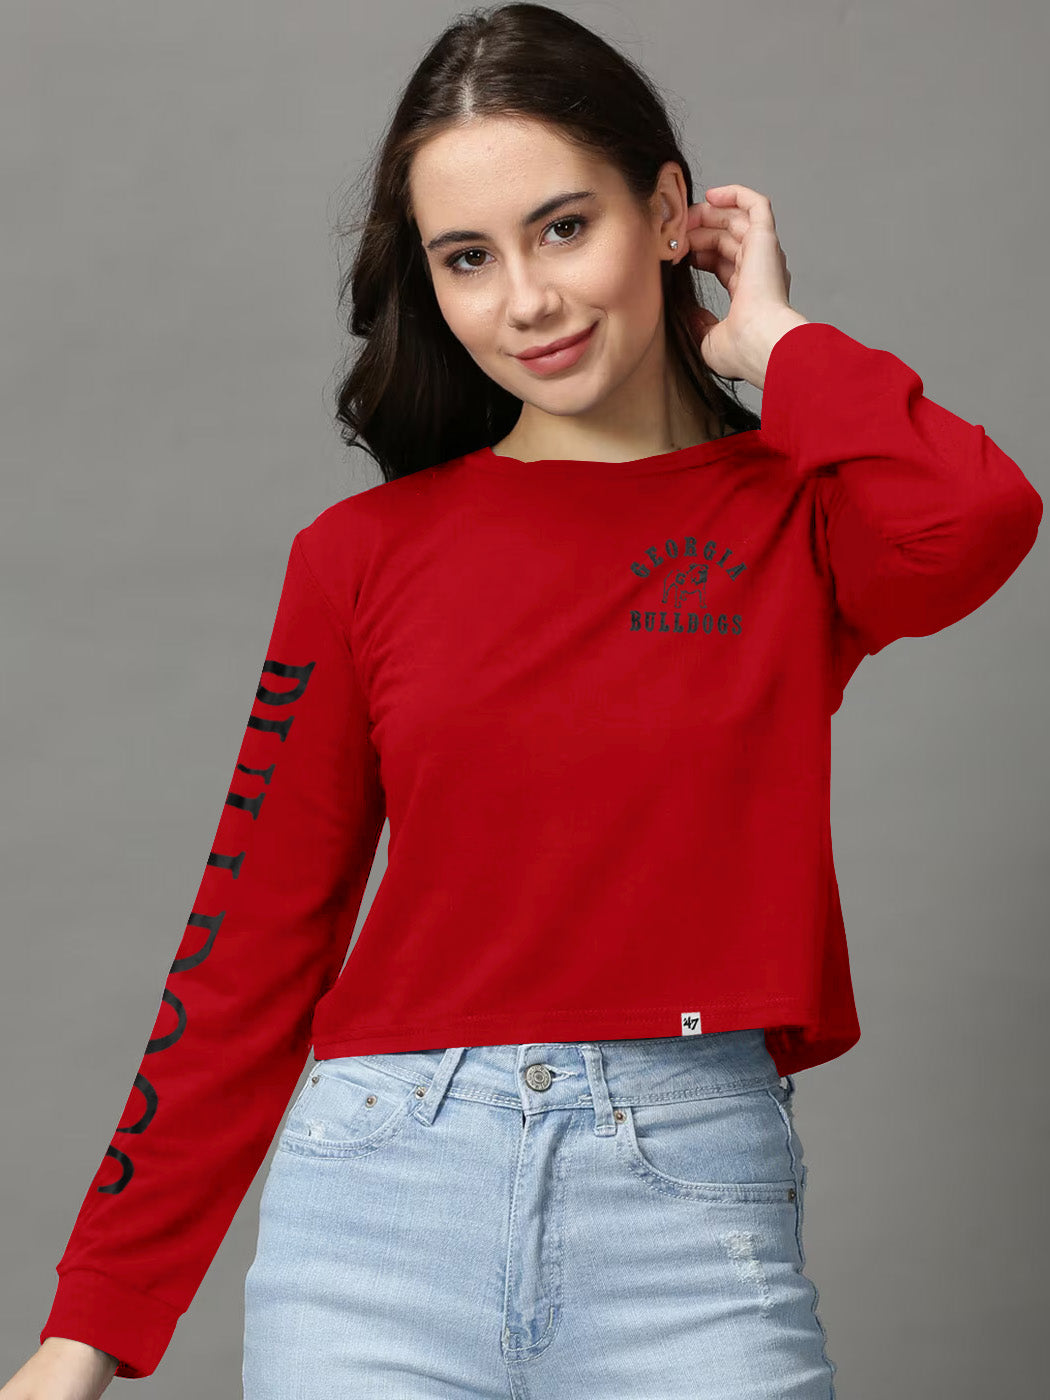 47 Crew Neck Full Sleeve Crop Tee Shirt For Ladies-Red-SP1988